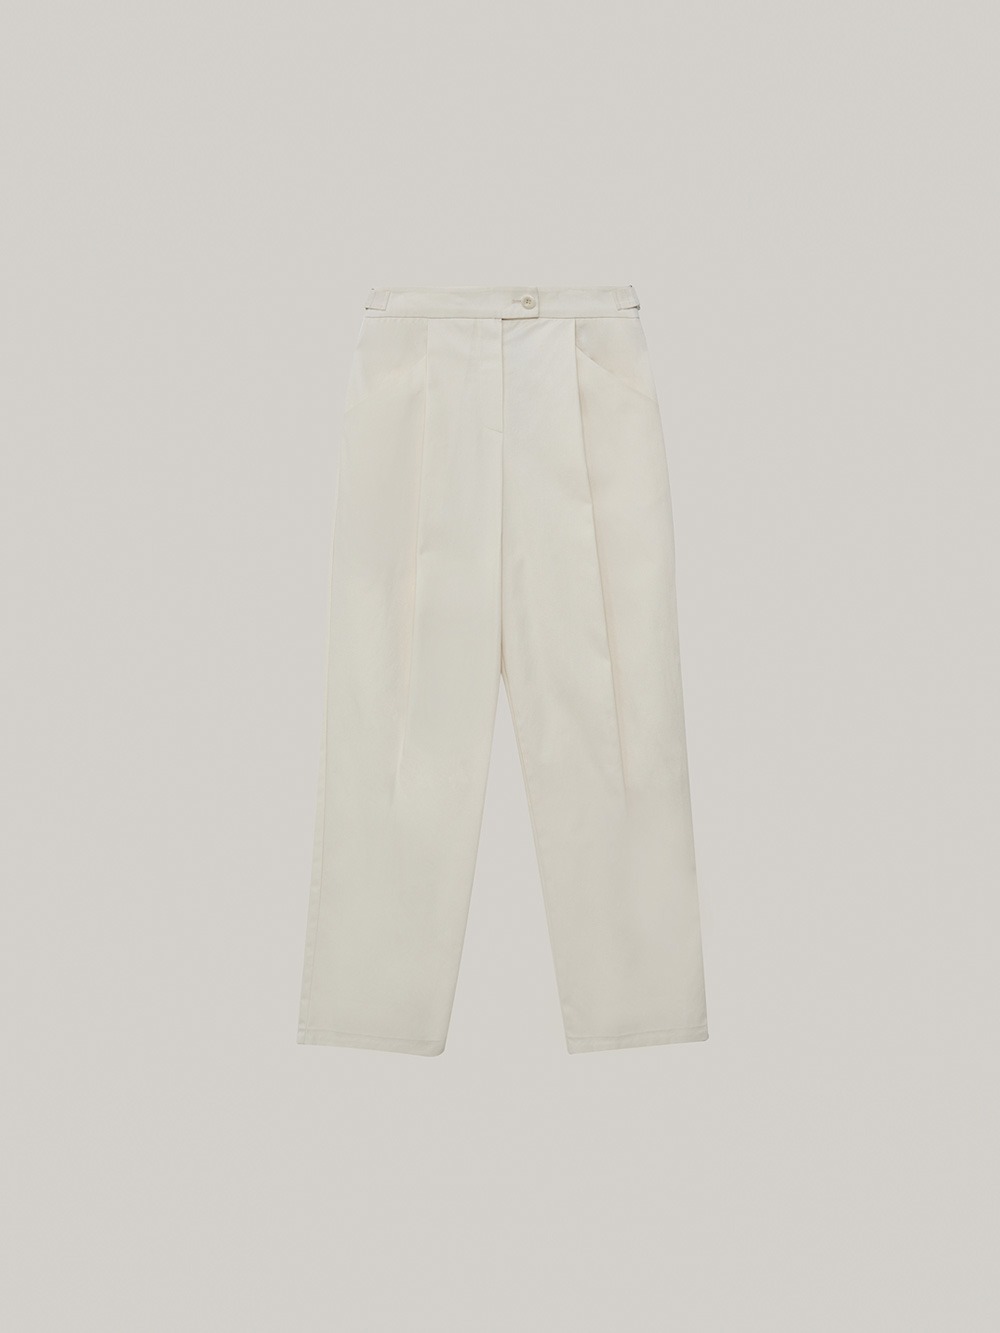 Rounded Tuck Pants (ivory)